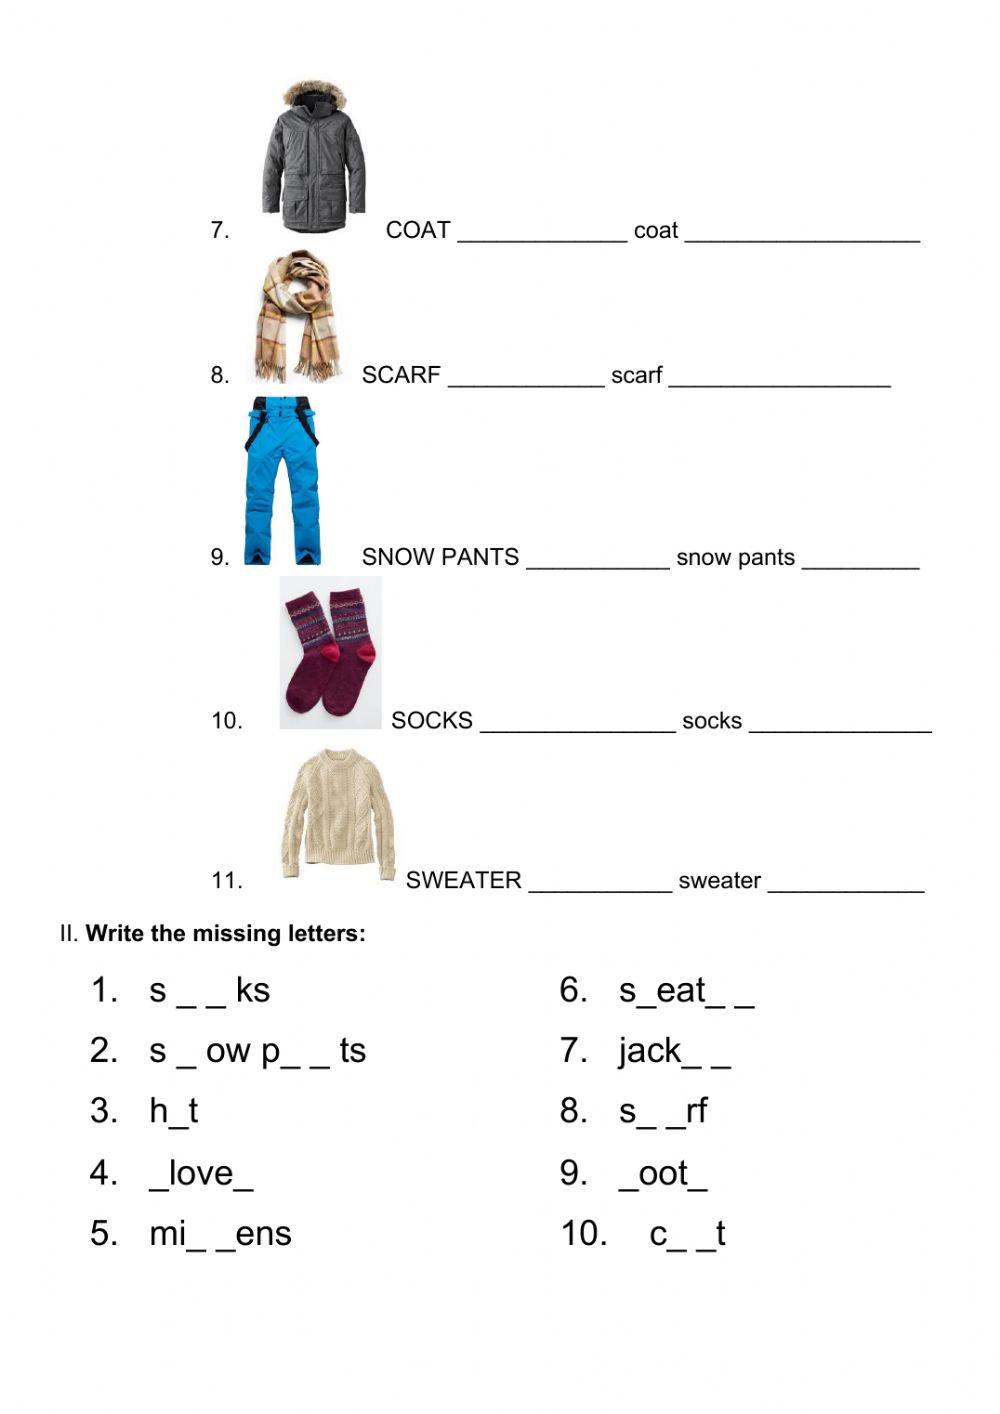 Winter clothes spelling practice